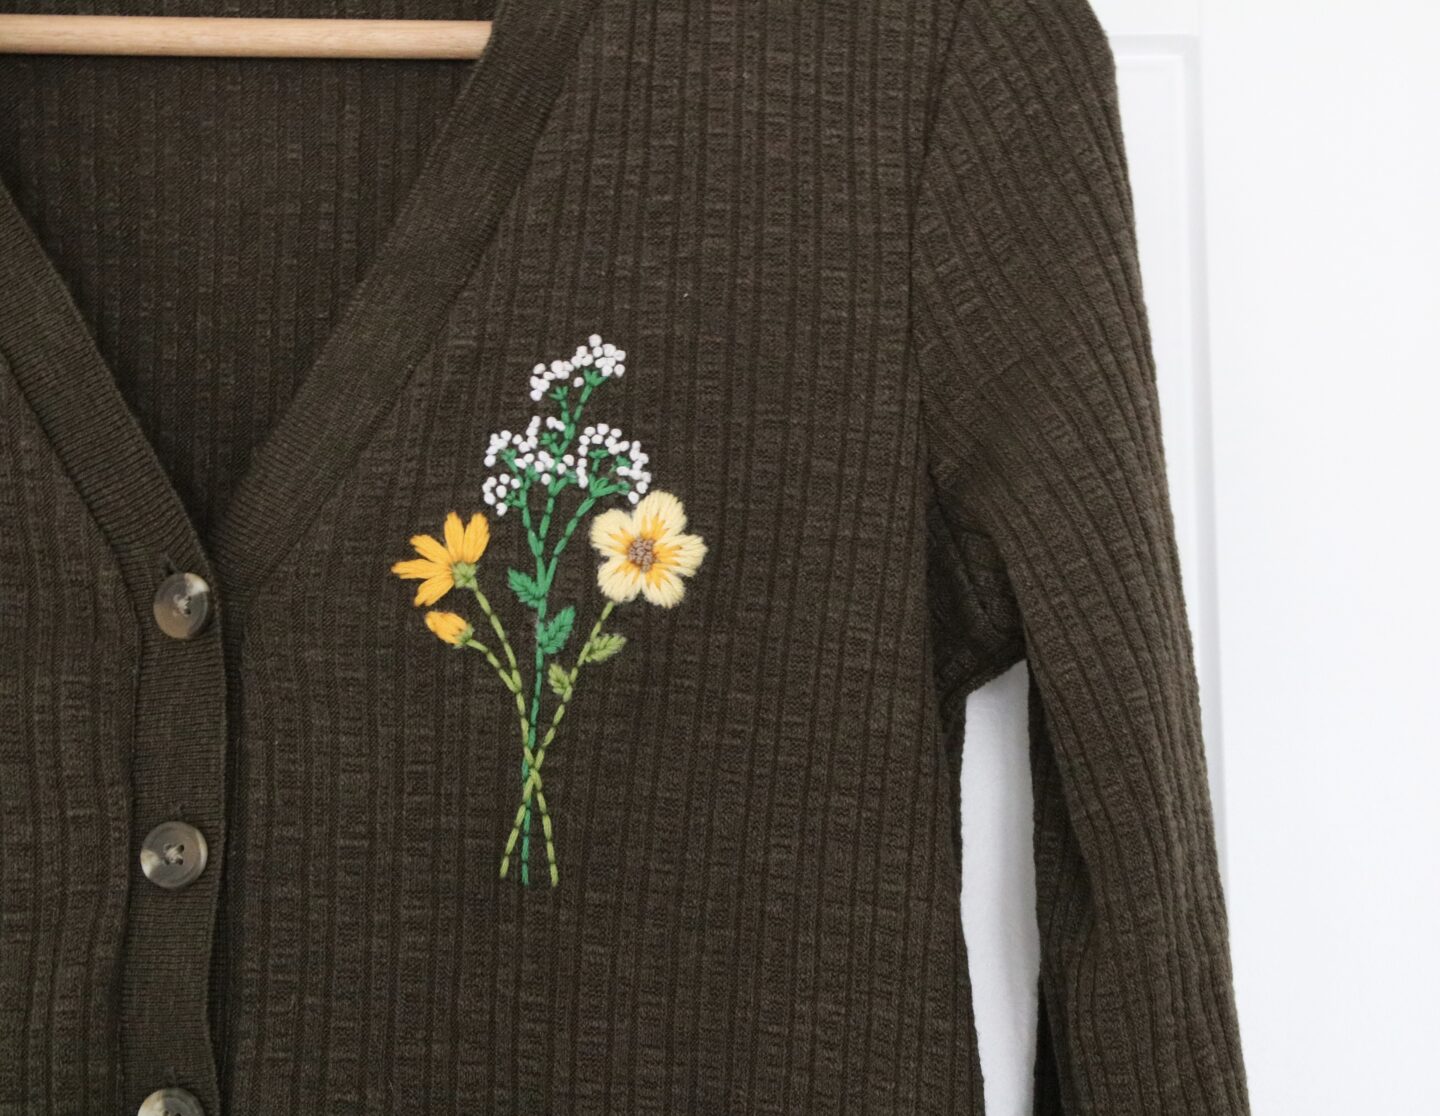 Khaki cardigan hand embroidered with a bouquet of flowers featuring; gypsophila, blanket flowers, and cosmos.